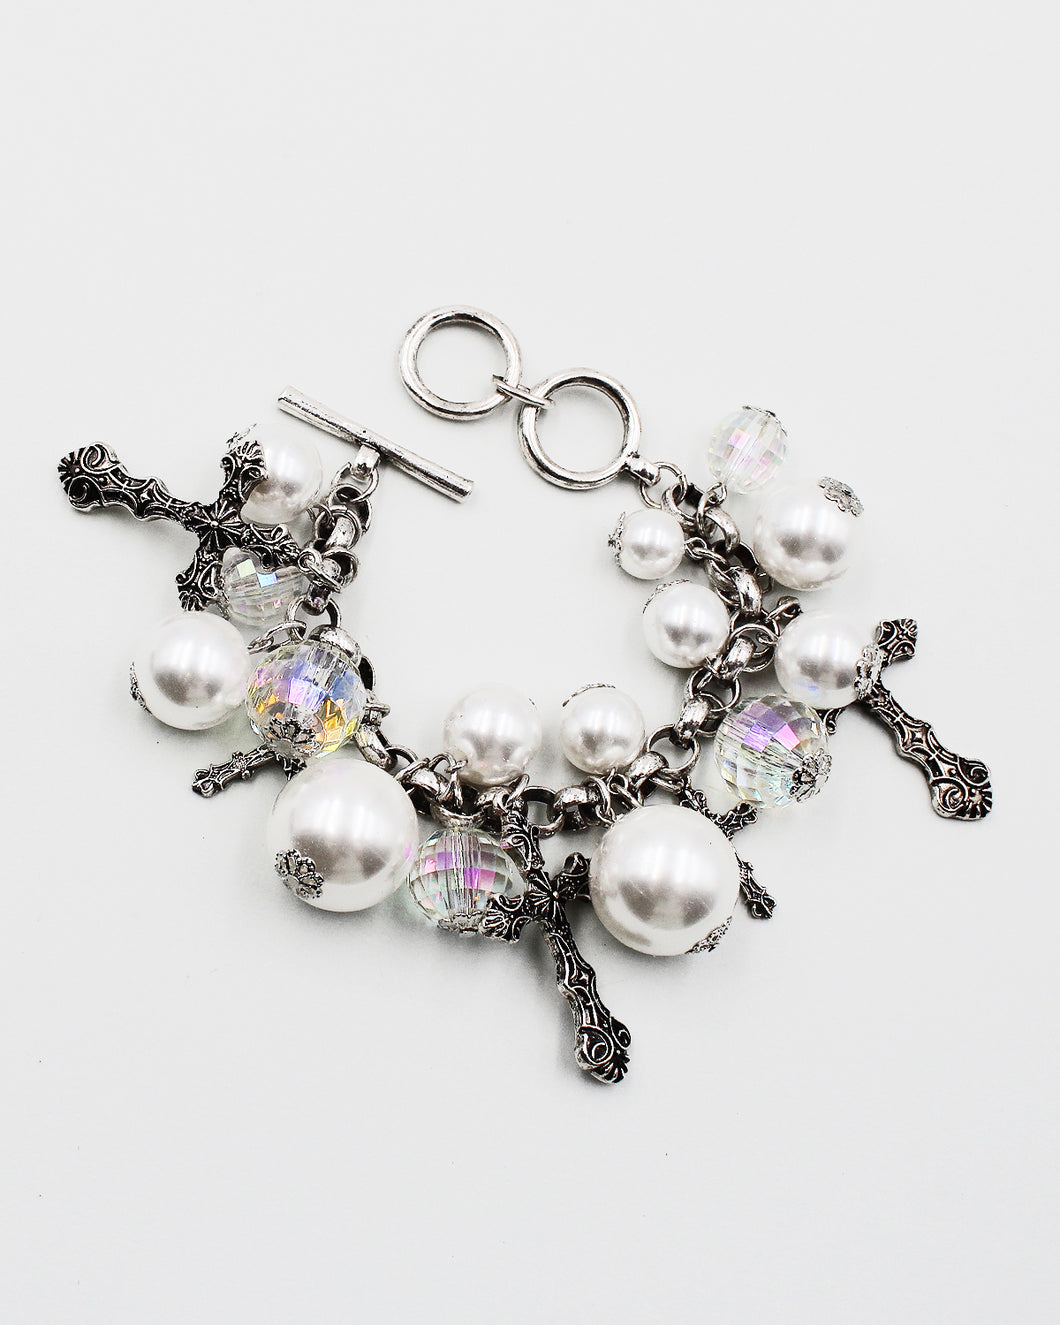 Cross Charm Bracelet with Pearl Beads